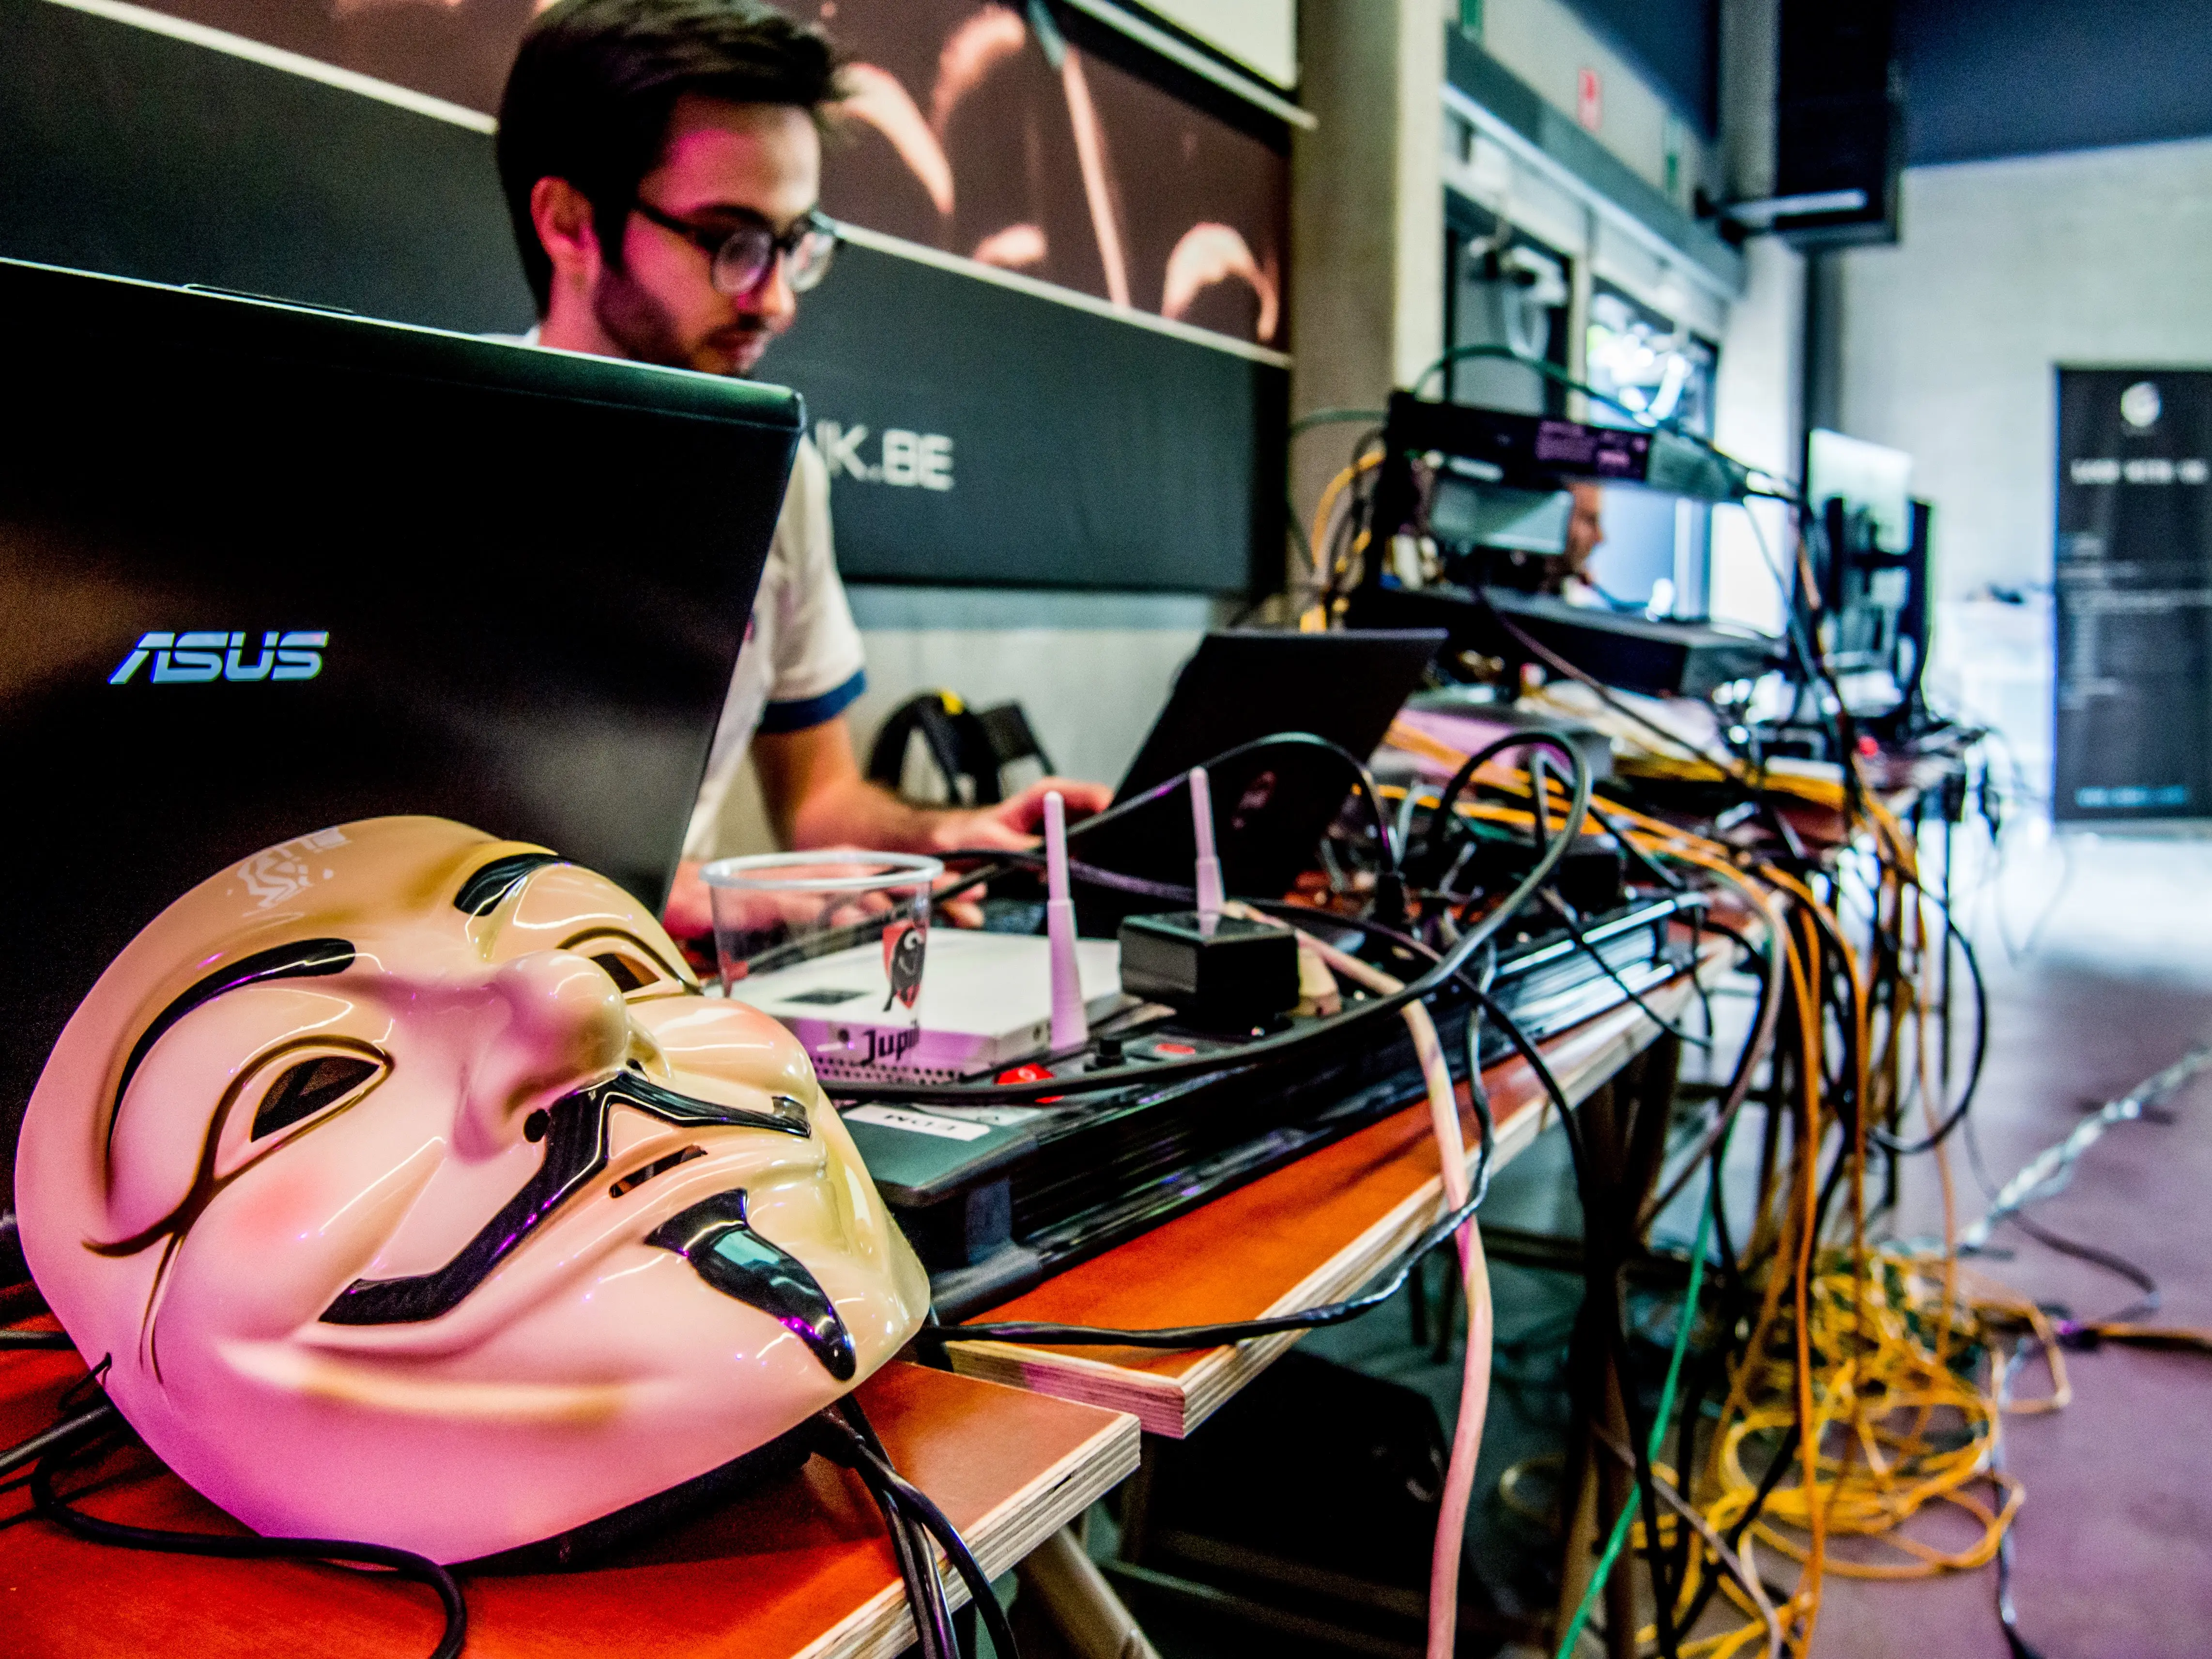 Staff is looking at the competition, with a Guy Fawkes mask at the front of the desk